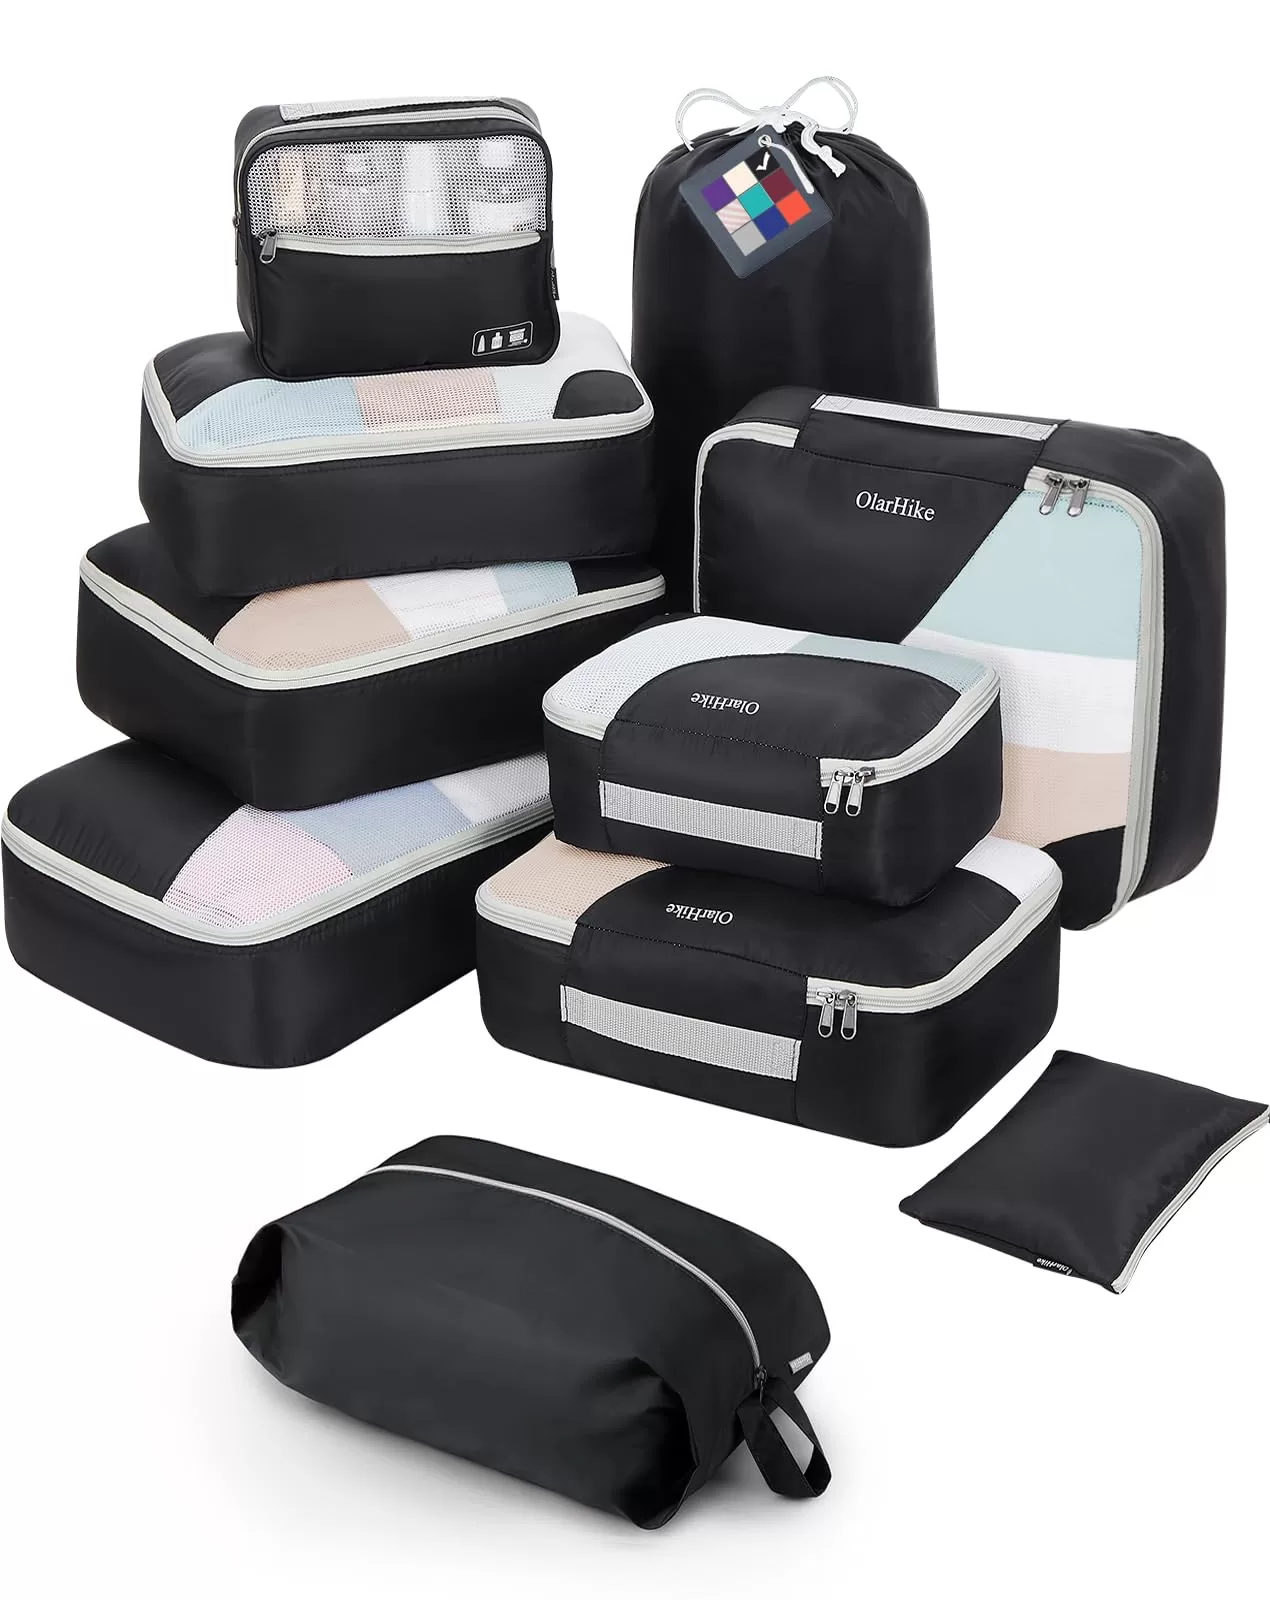 Best Packing Cubes for Travel in black